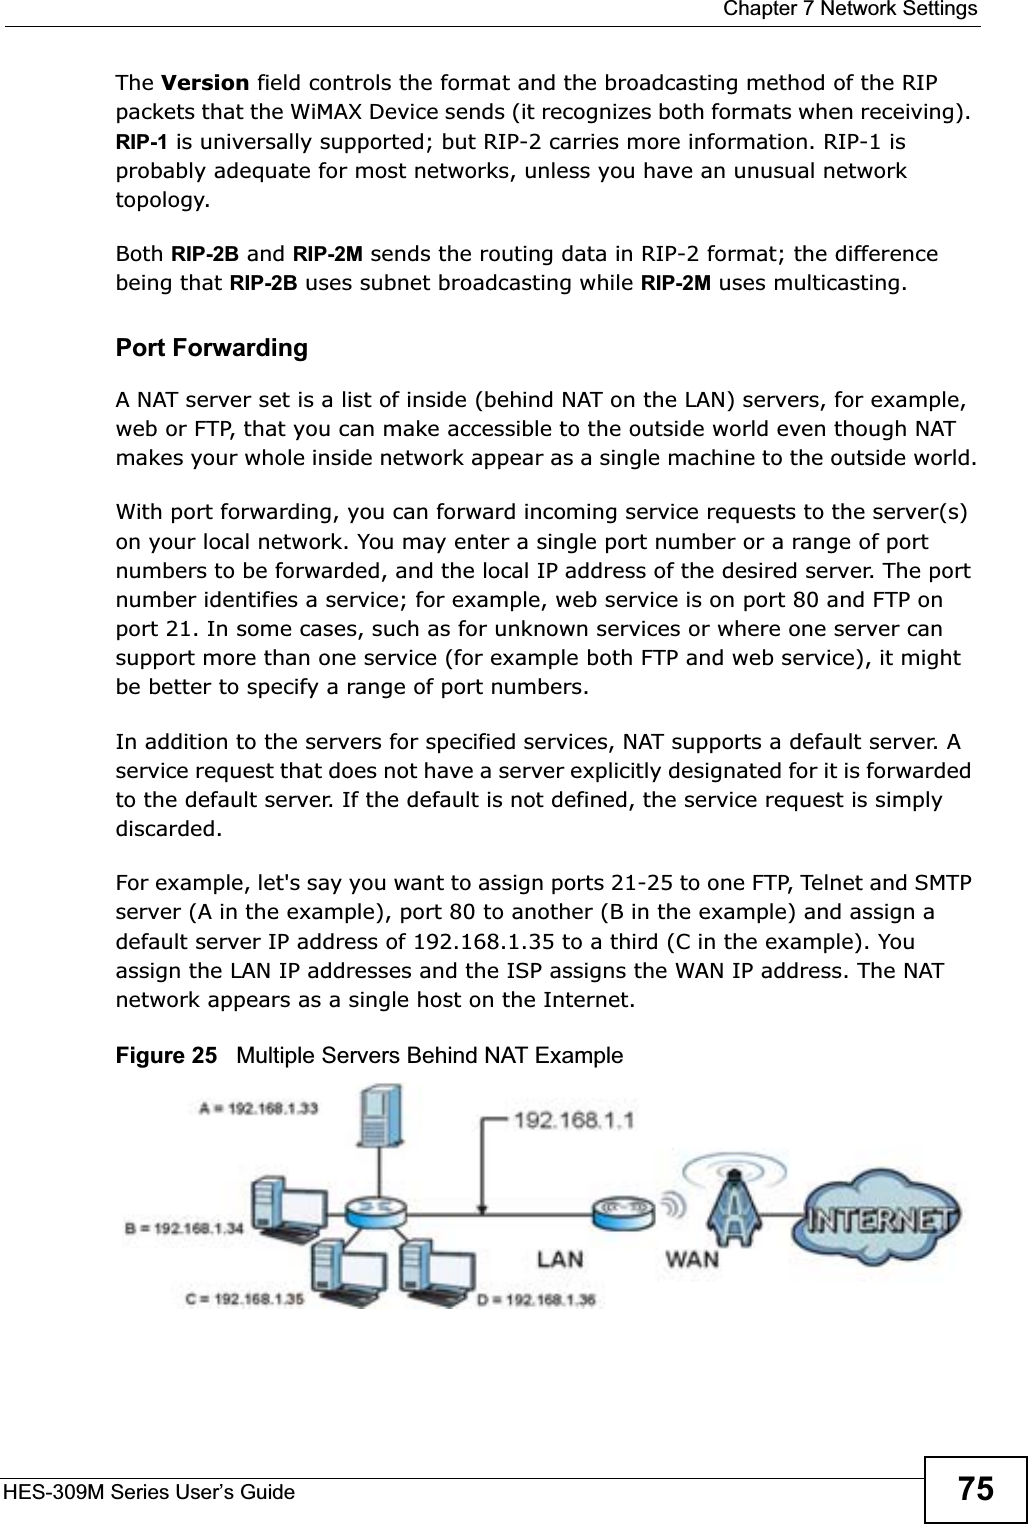  Chapter 7 Network SettingsHES-309M Series User’s Guide 75The Version field controls the format and the broadcasting method of the RIP packets that the WiMAX Device sends (it recognizes both formats when receiving). RIP-1 is universally supported; but RIP-2 carries more information. RIP-1 is probably adequate for most networks, unless you have an unusual network topology.Both RIP-2B and RIP-2M sends the routing data in RIP-2 format; the difference being that RIP-2B uses subnet broadcasting while RIP-2M uses multicasting.Port Forwarding A NAT server set is a list of inside (behind NAT on the LAN) servers, for example, web or FTP, that you can make accessible to the outside world even though NAT makes your whole inside network appear as a single machine to the outside world.With port forwarding, you can forward incoming service requests to the server(s) on your local network. You may enter a single port number or a range of port numbers to be forwarded, and the local IP address of the desired server. The port number identifies a service; for example, web service is on port 80 and FTP on port 21. In some cases, such as for unknown services or where one server can support more than one service (for example both FTP and web service), it might be better to specify a range of port numbers. In addition to the servers for specified services, NAT supports a default server. A service request that does not have a server explicitly designated for it is forwarded to the default server. If the default is not defined, the service request is simply discarded.For example, let&apos;s say you want to assign ports 21-25 to one FTP, Telnet and SMTP server (A in the example), port 80 to another (B in the example) and assign a default server IP address of 192.168.1.35 to a third (C in the example). You assign the LAN IP addresses and the ISP assigns the WAN IP address. The NAT network appears as a single host on the Internet.Figure 25   Multiple Servers Behind NAT Example